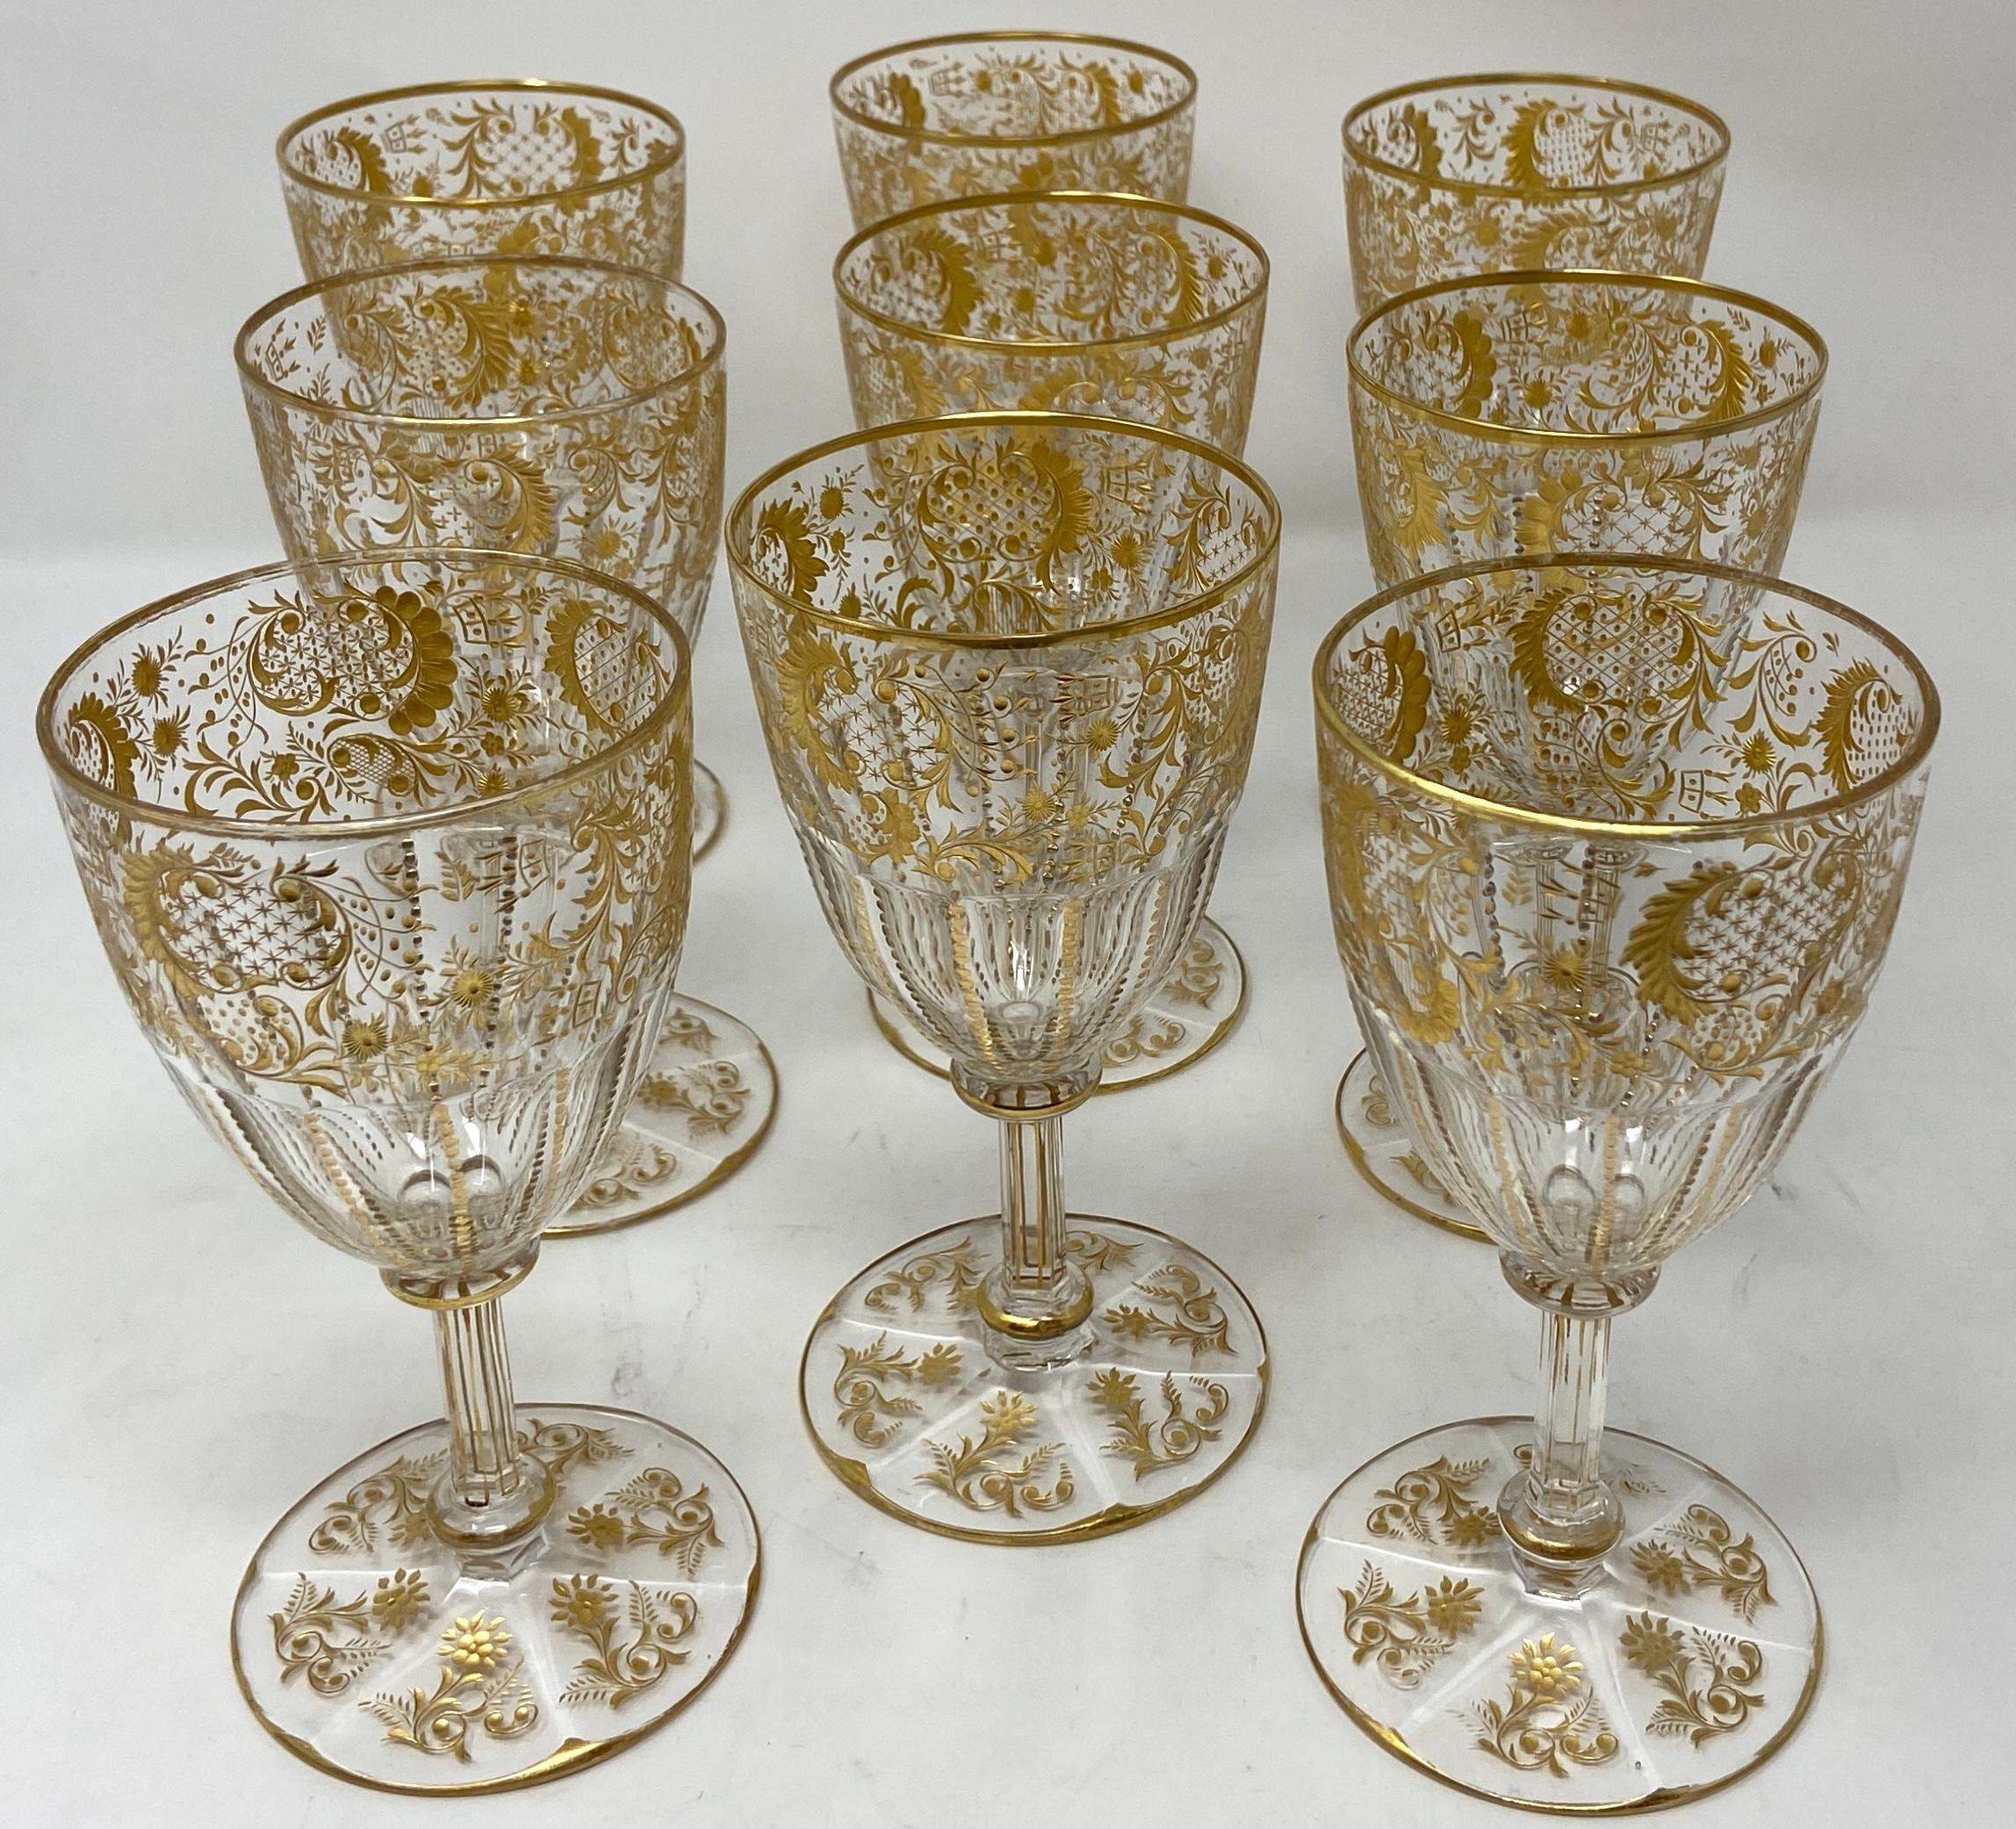 Set of 9 antique French 